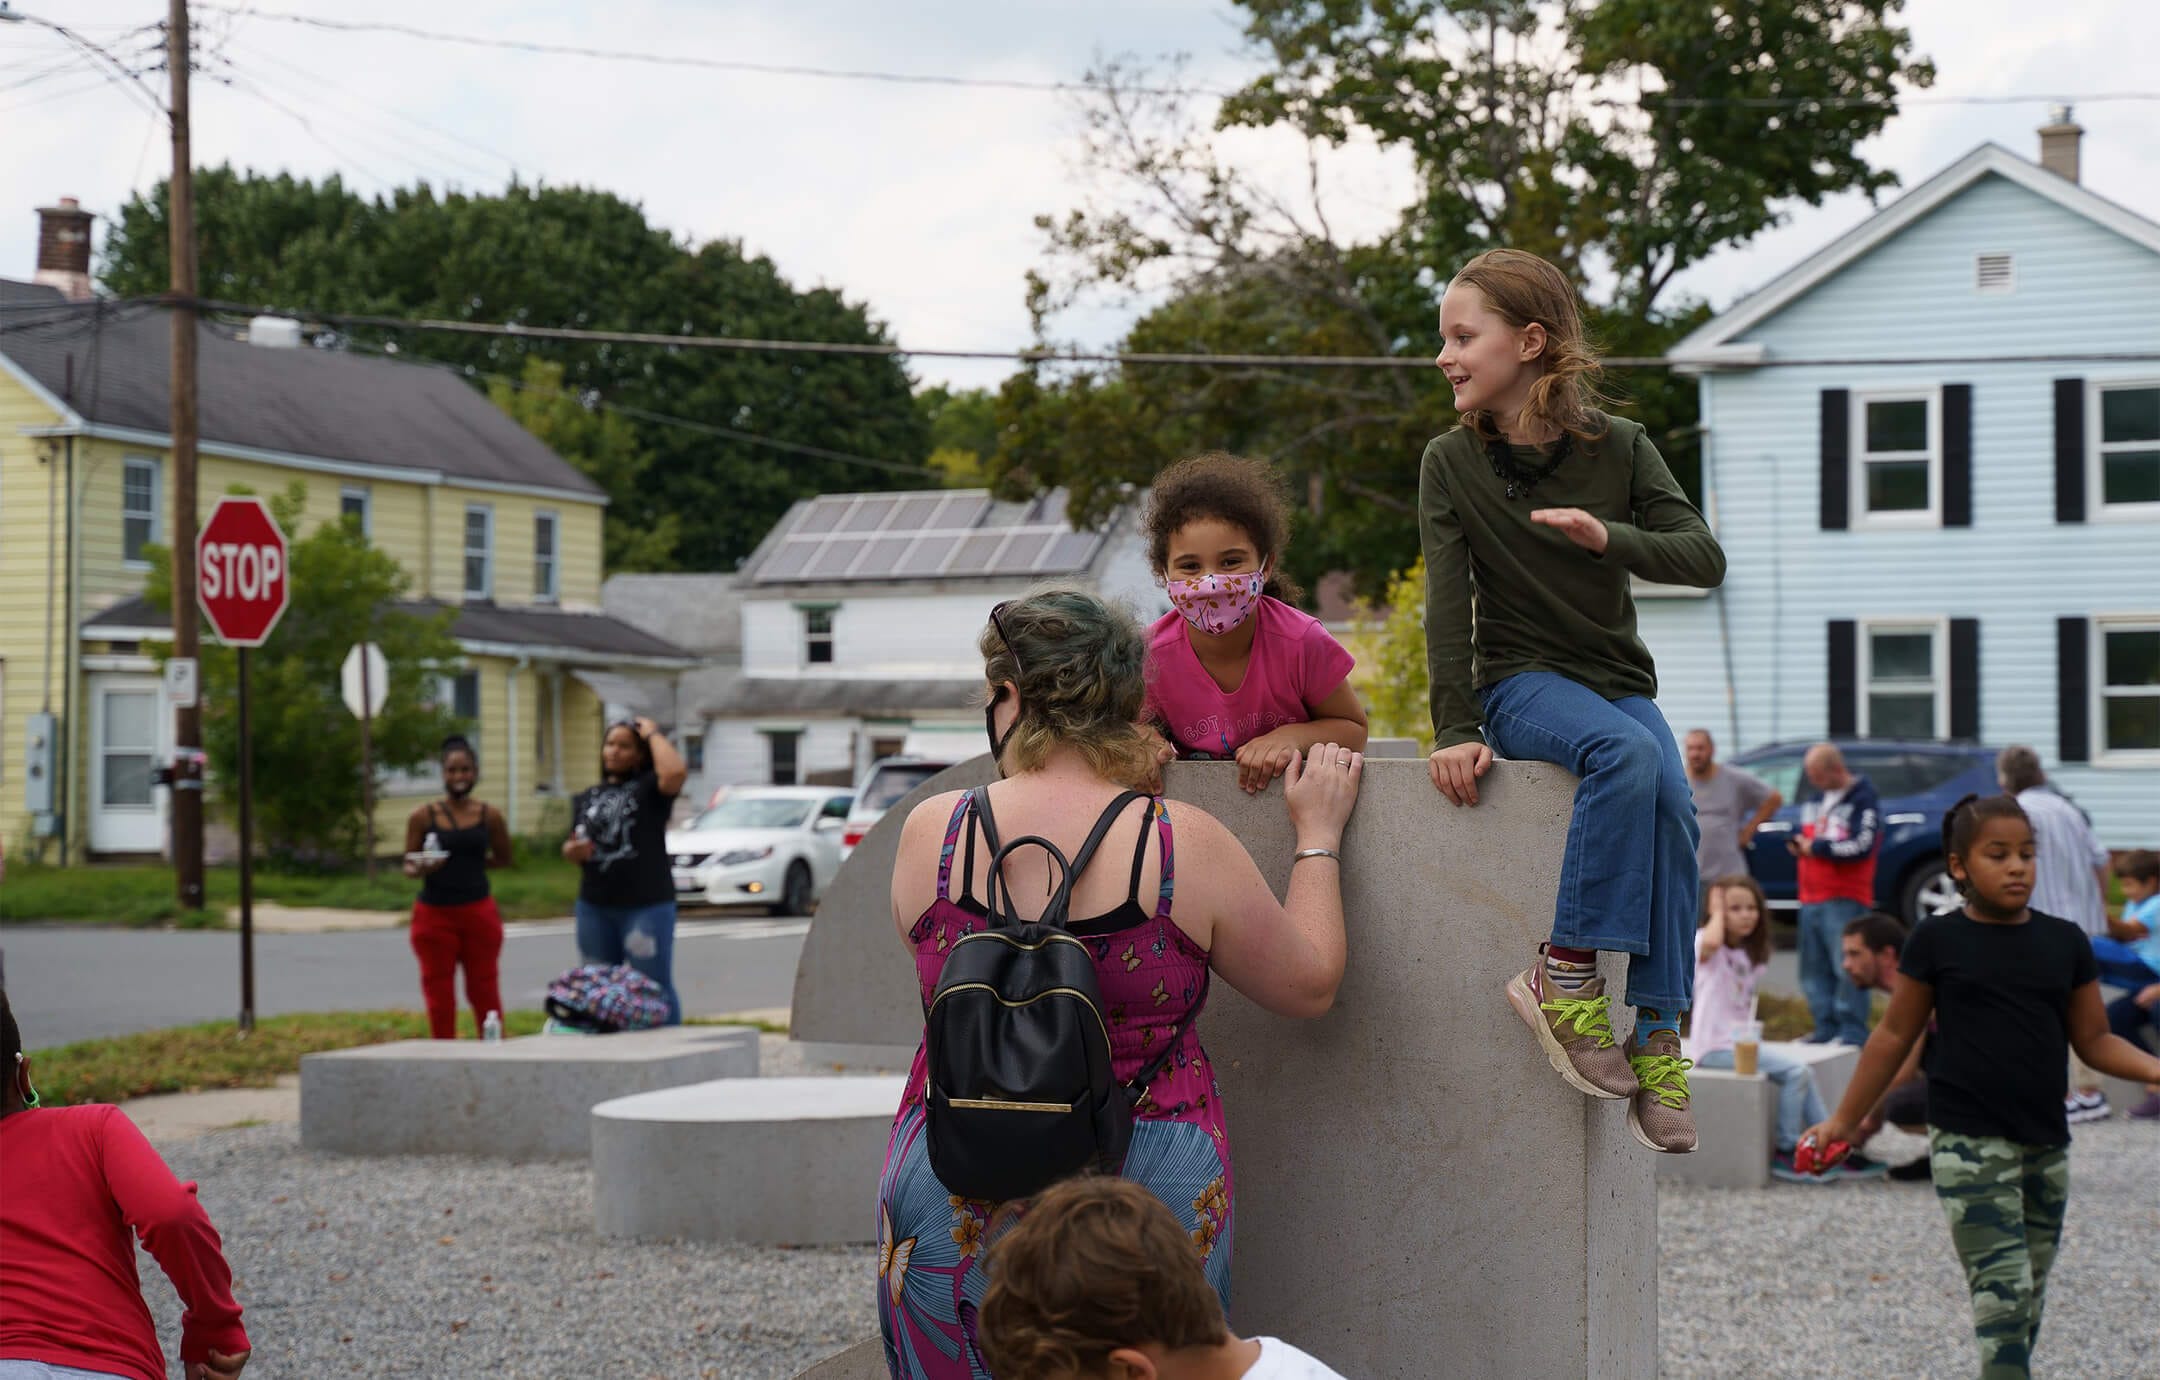 Several kids climbing on a concrete form in a busy playground; a woman stands near them with her back to the camera